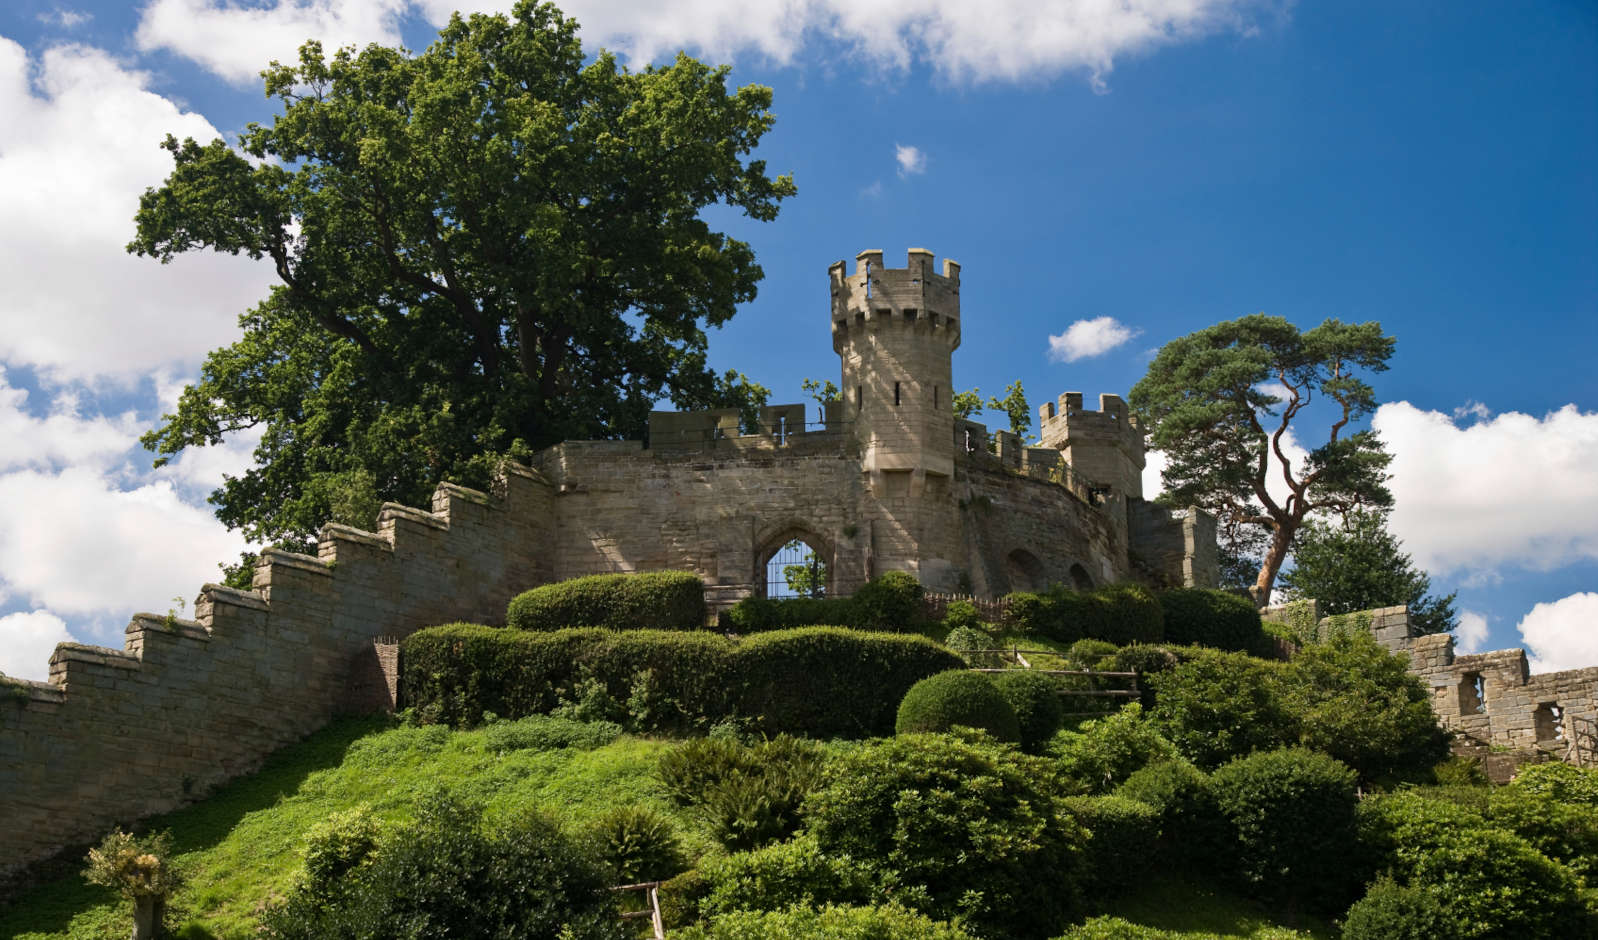 Discover a great day out at Warwick Castle